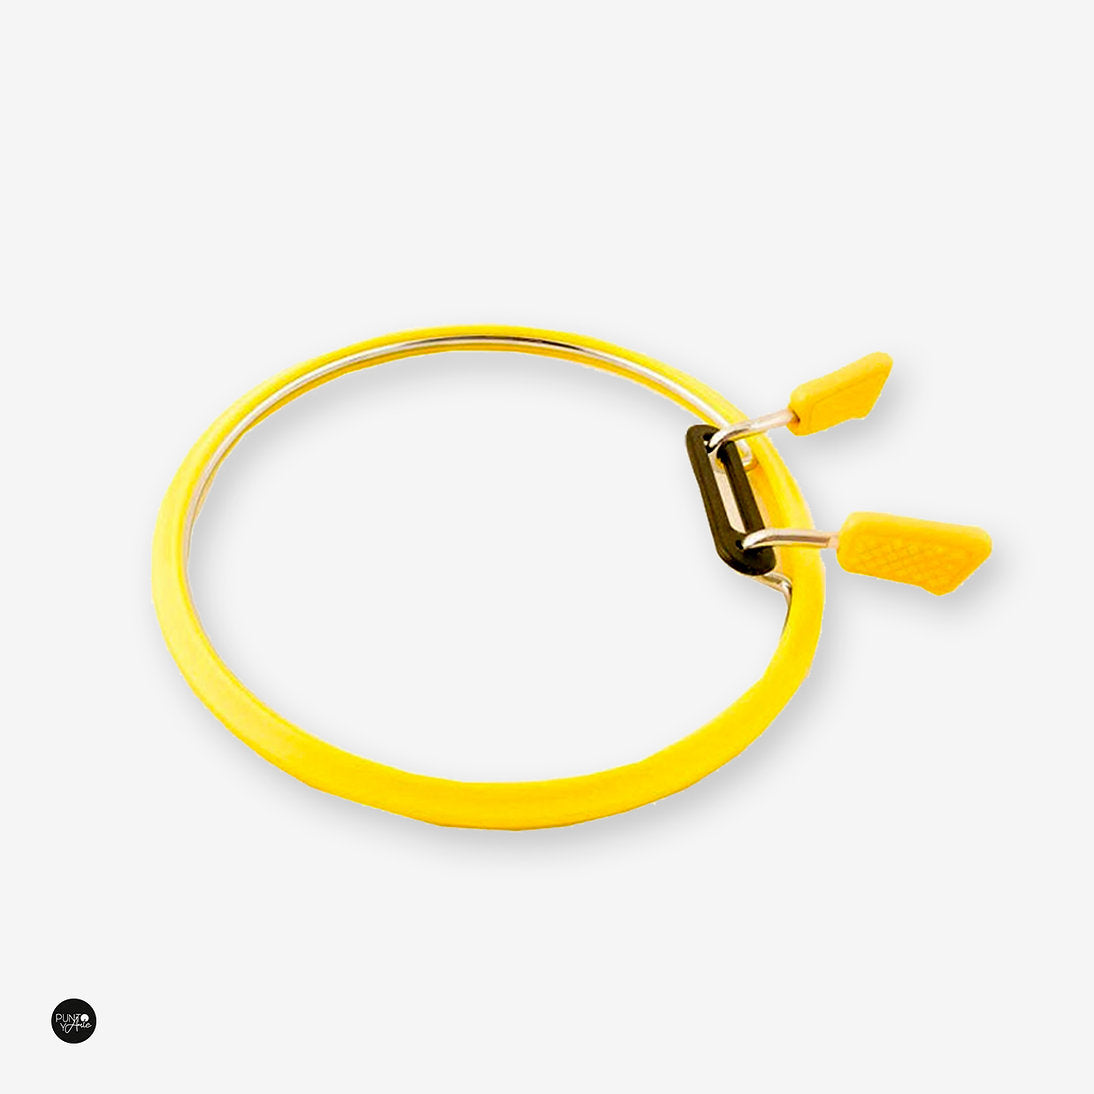 Nurge 160 Flexible Hoop in Yellow: Light Up Your Embroidery Projects with Ease and Precision